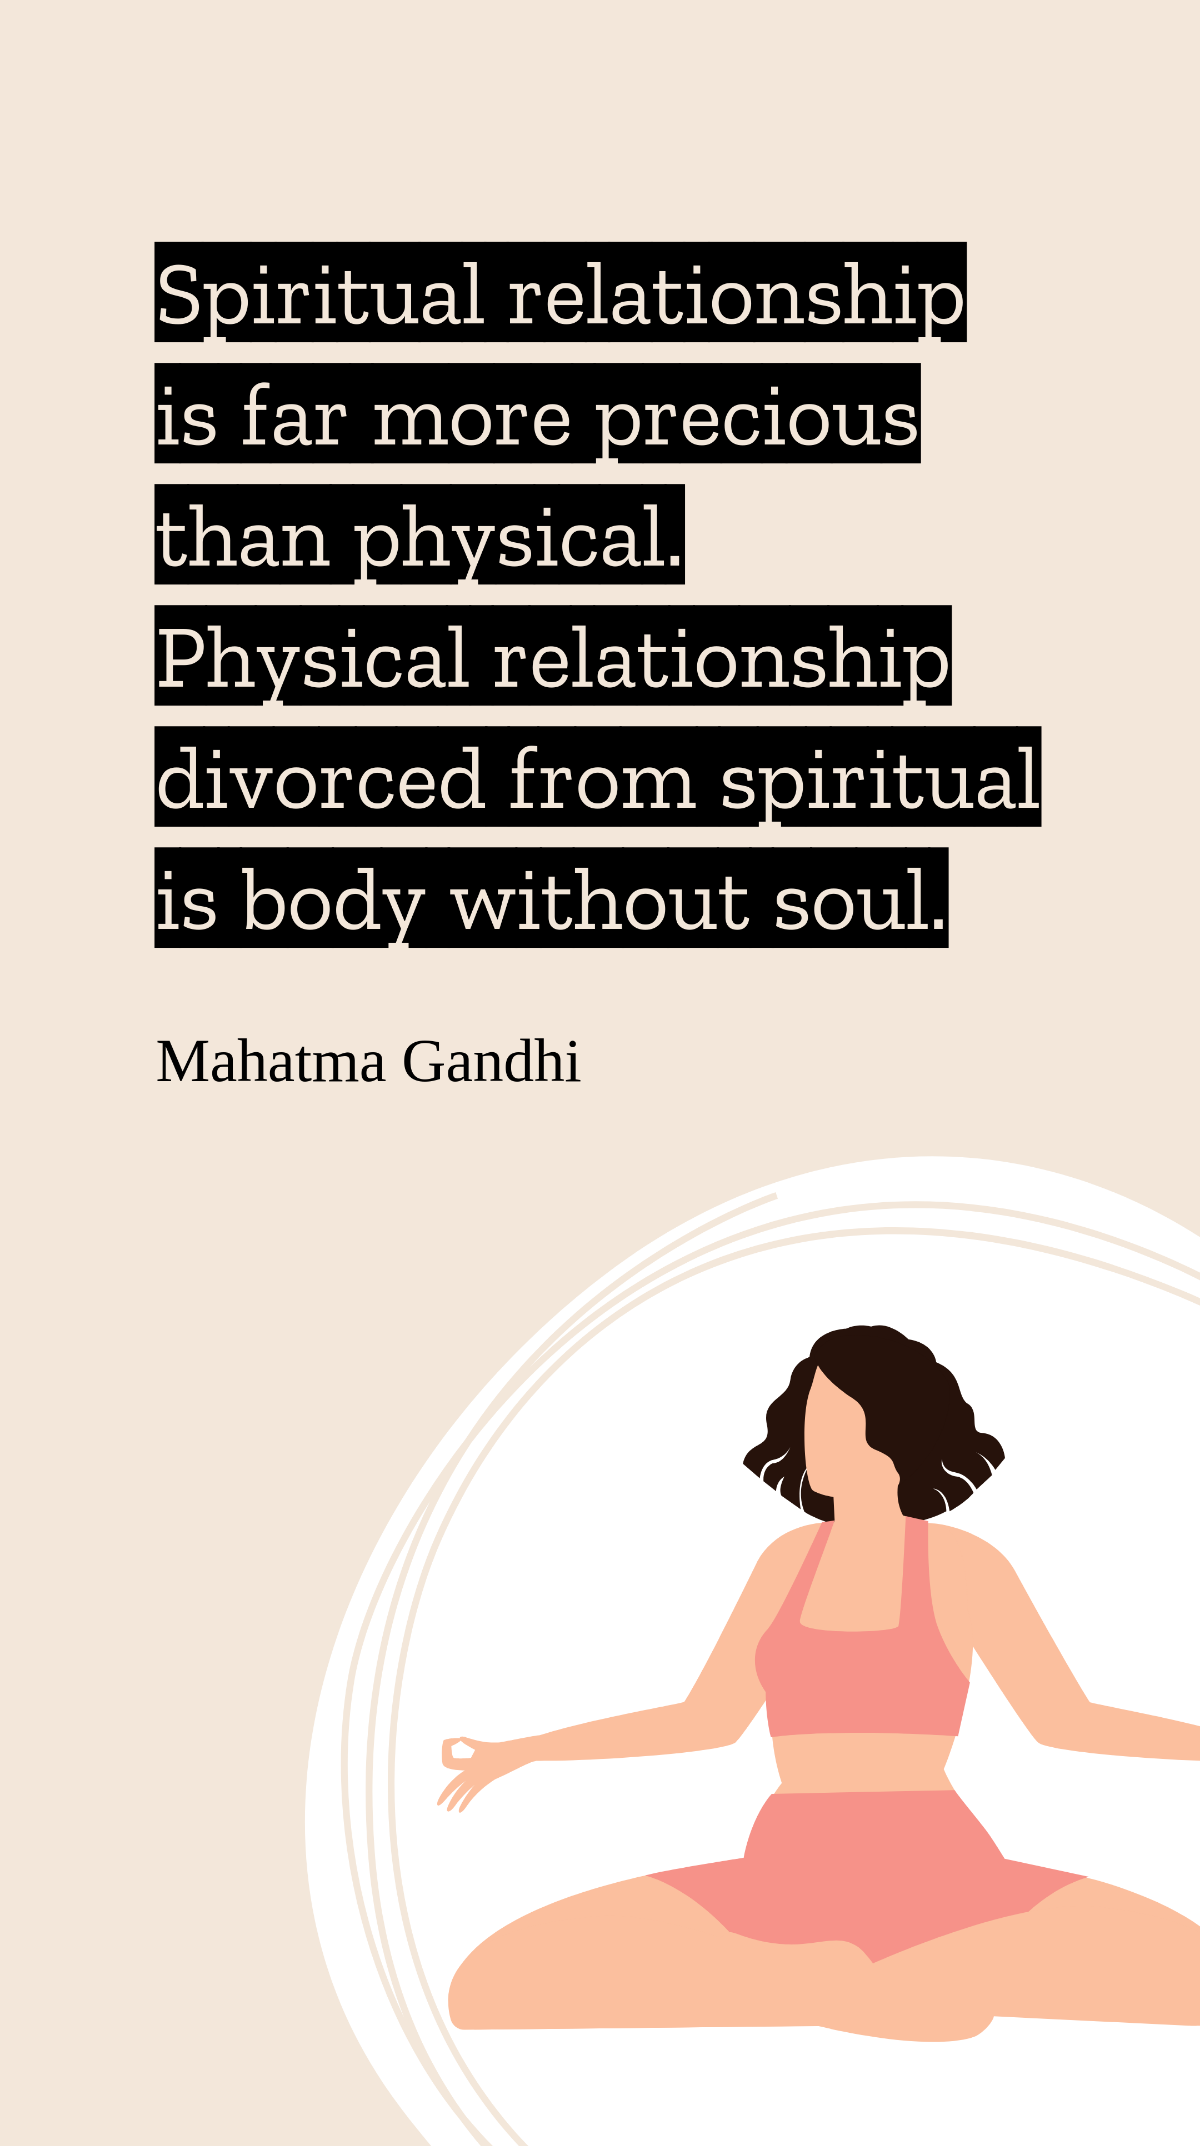 Mahatma Gandhi - Spiritual relationship is far more precious than physical. Physical relationship divorced from spiritual is body without soul. Template